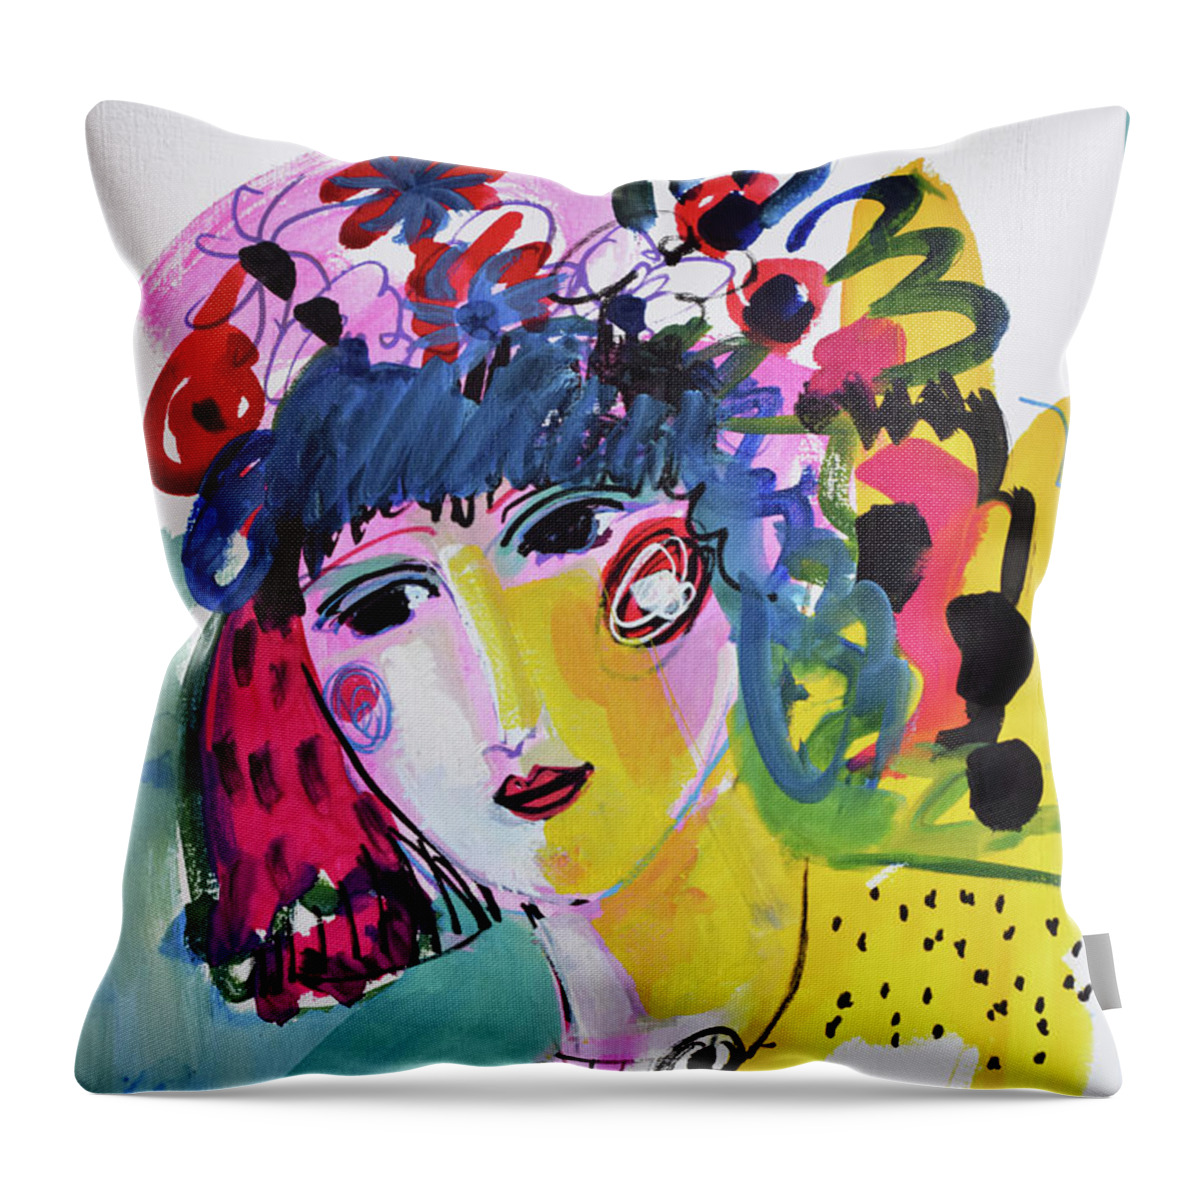 Portrait Throw Pillow featuring the painting Boho party by Amara Dacer